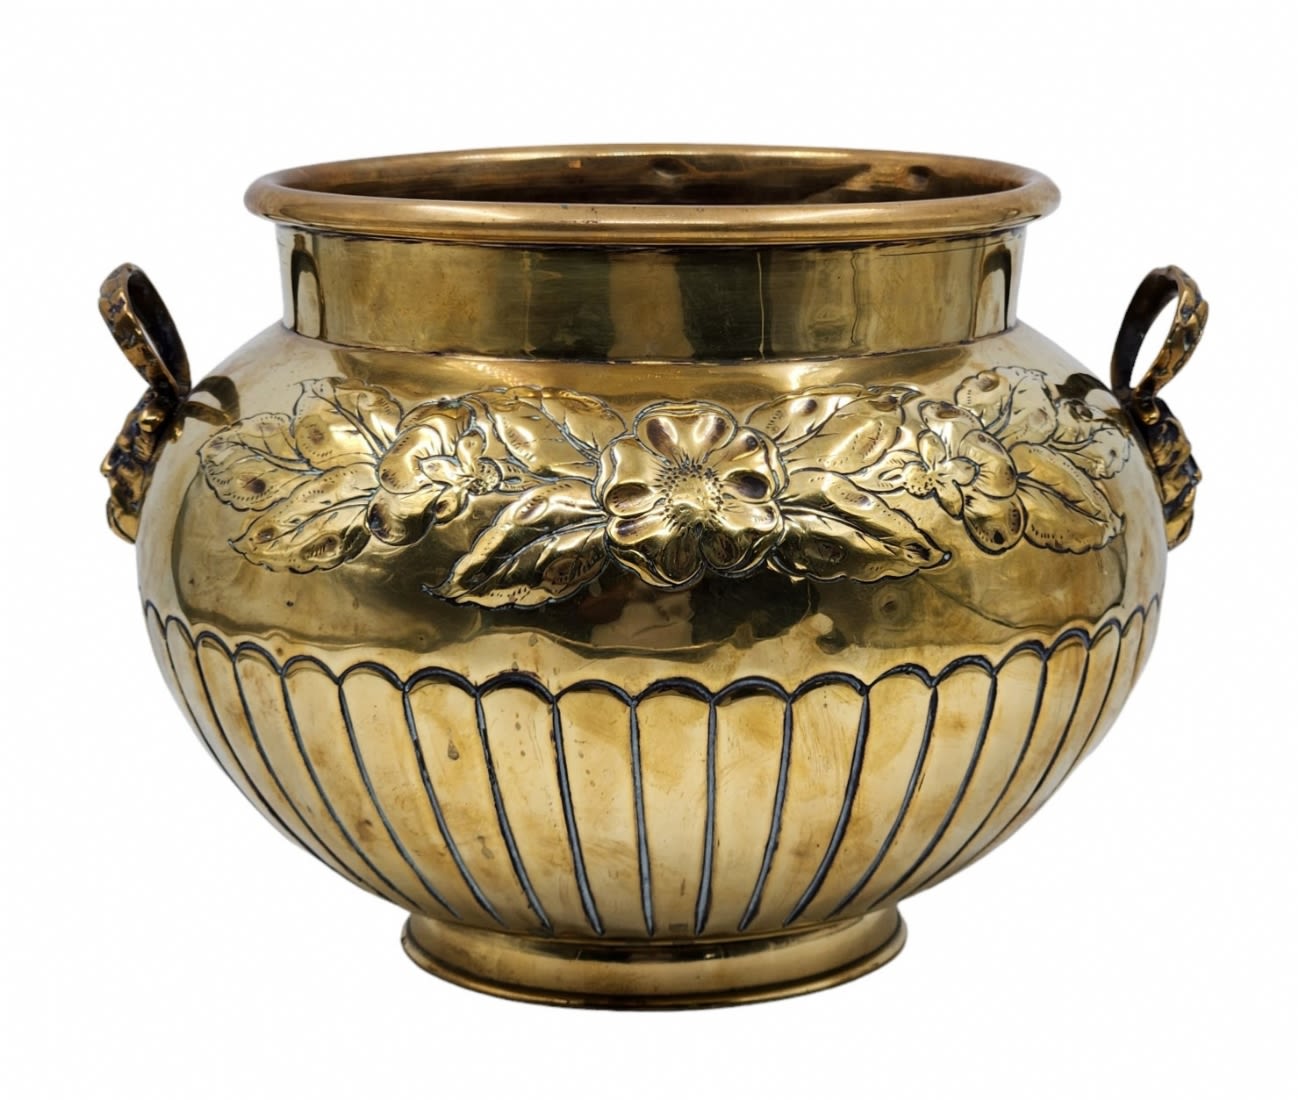 Pot (Jardiniere) , antique, English, from the 19th century (Victorian), made of brass, Width